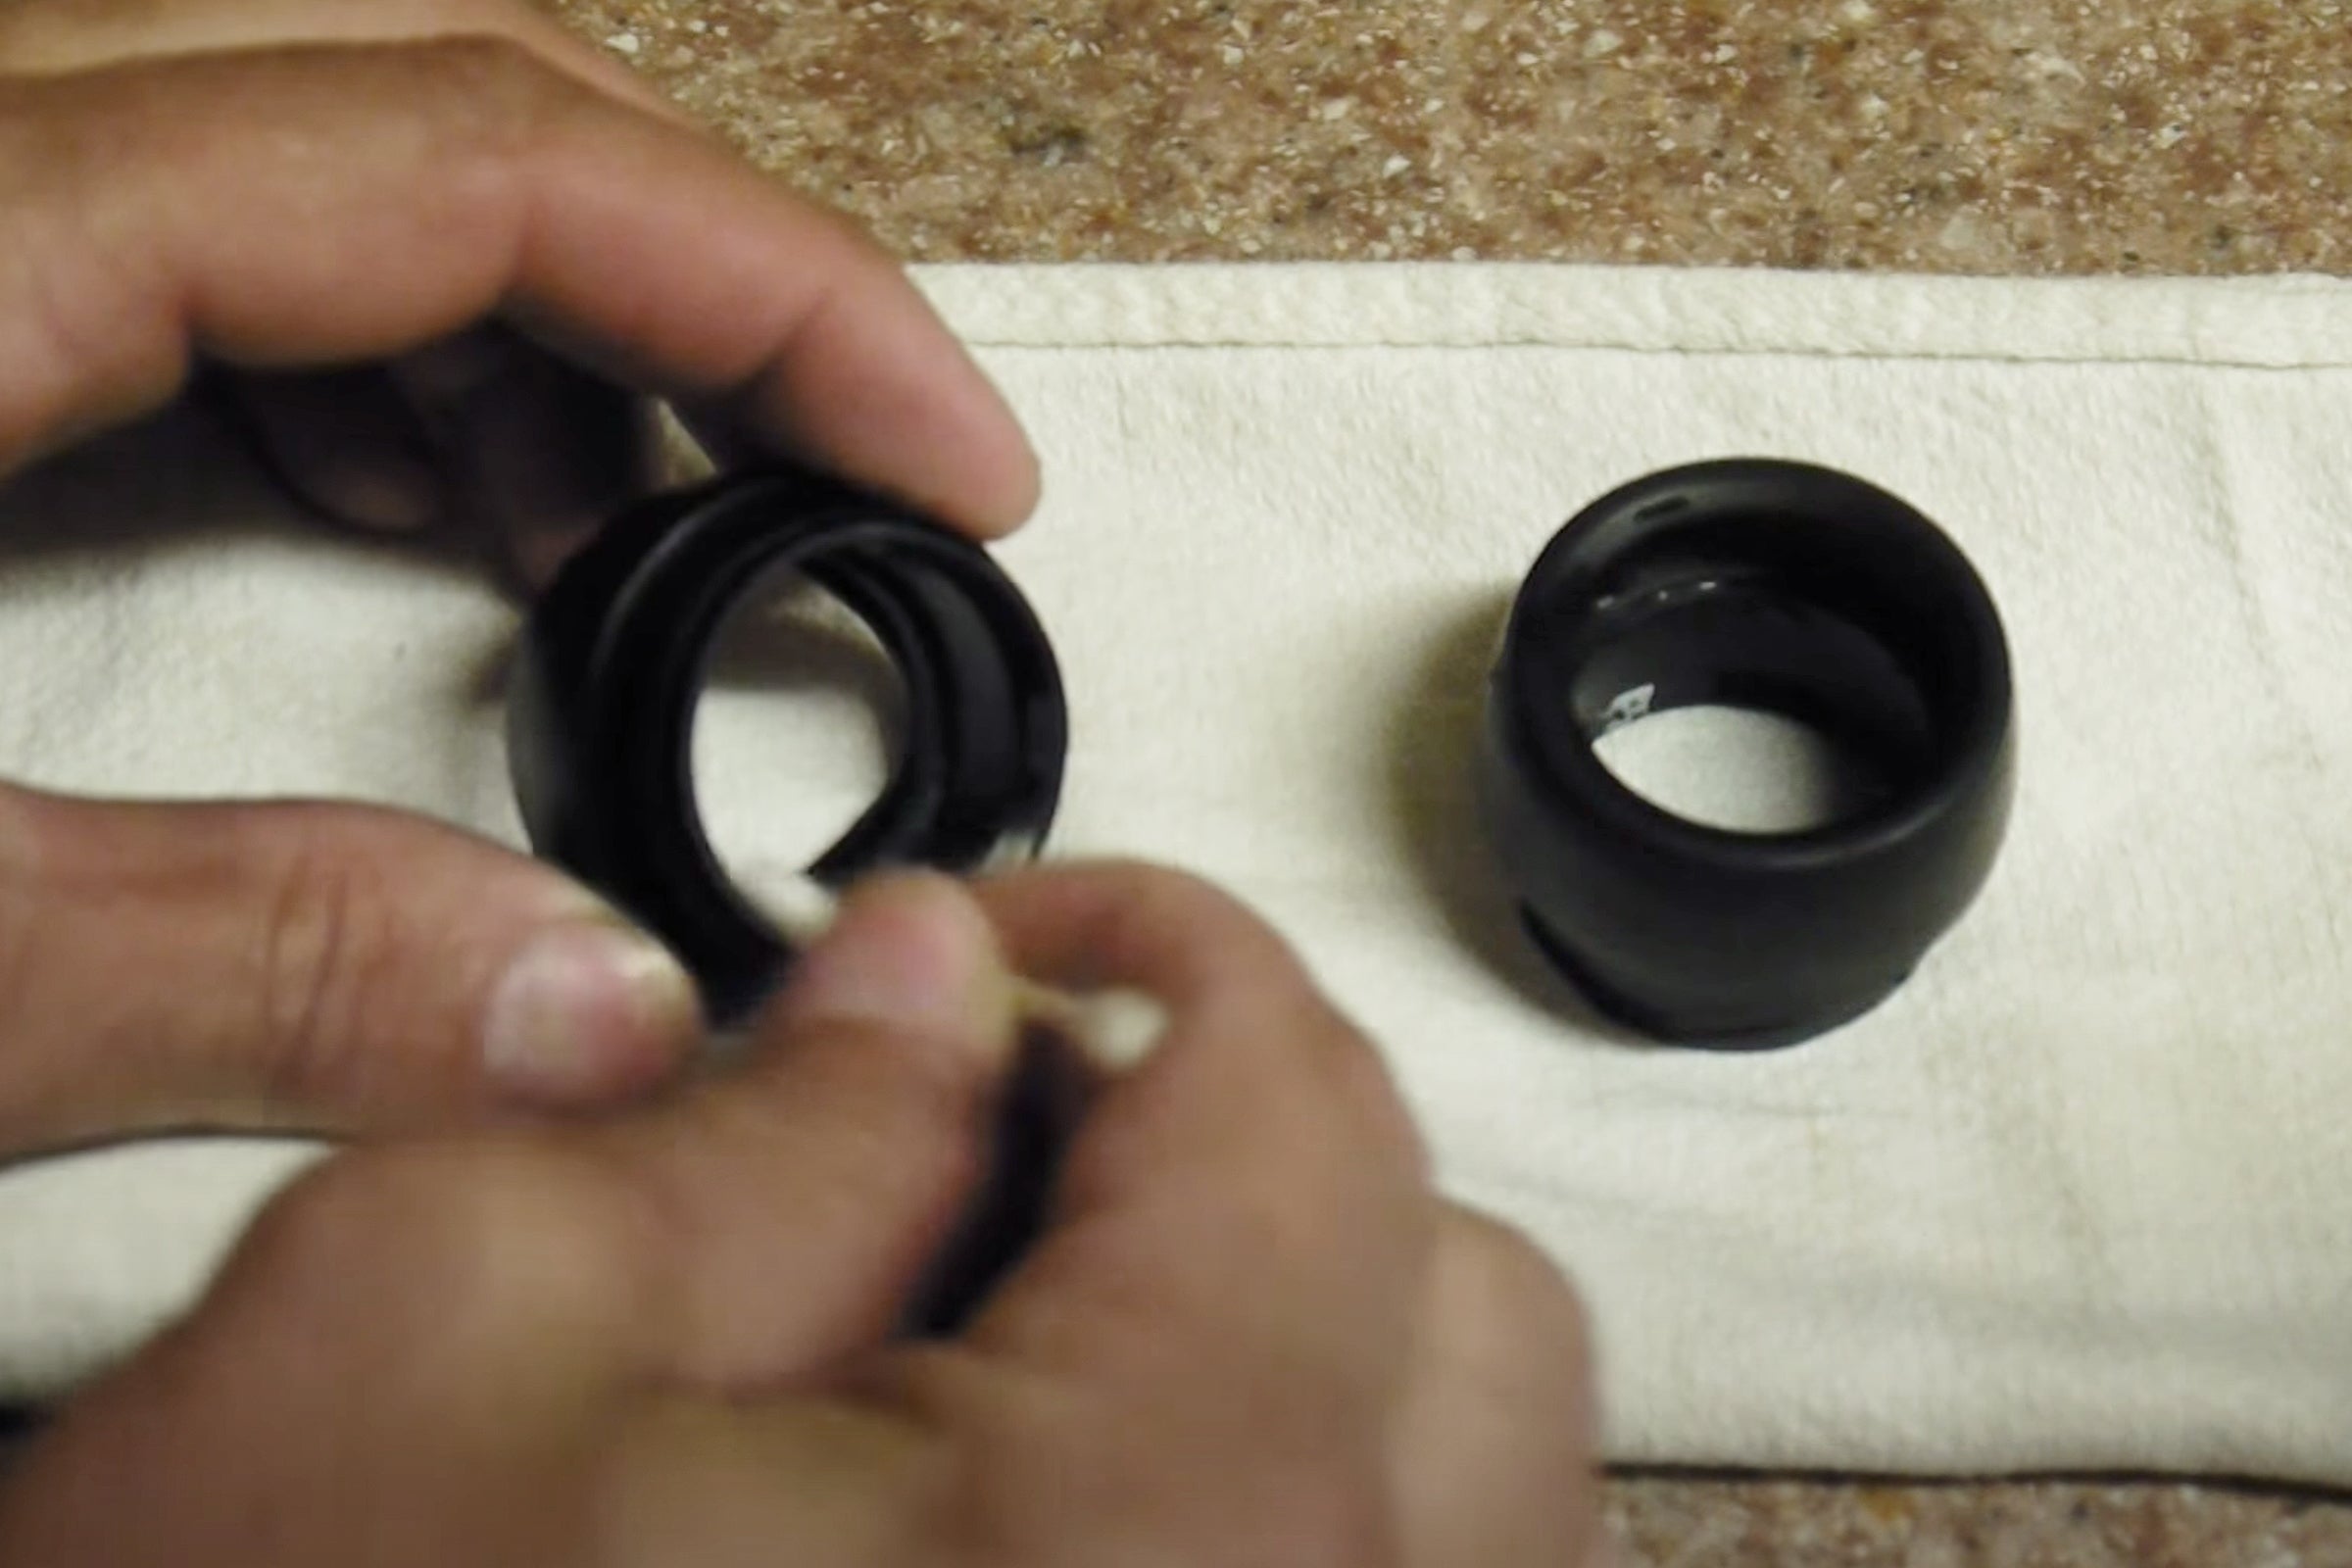 Cleaning and Storing Binoculars